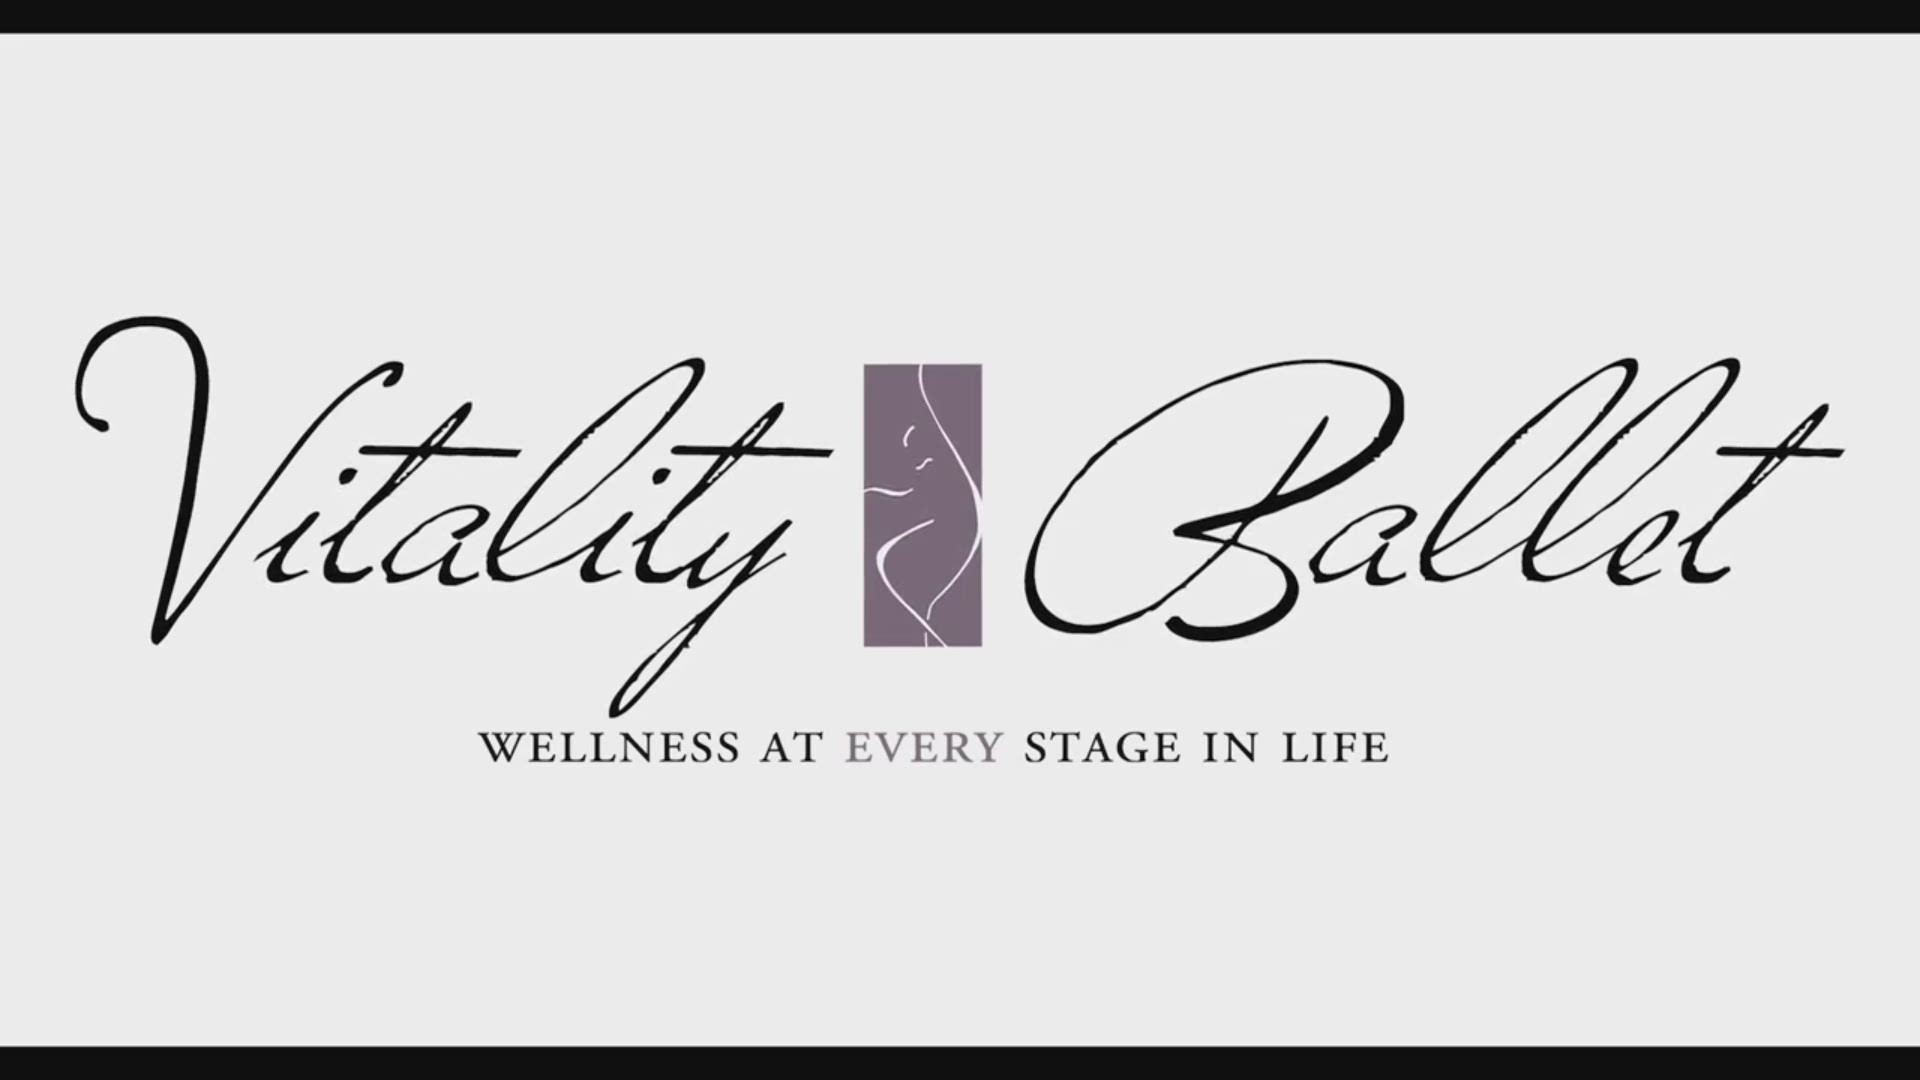 Vanessa Woods, founder of Vitality Ballet, explains the mission of her organization in this video produced by the company.